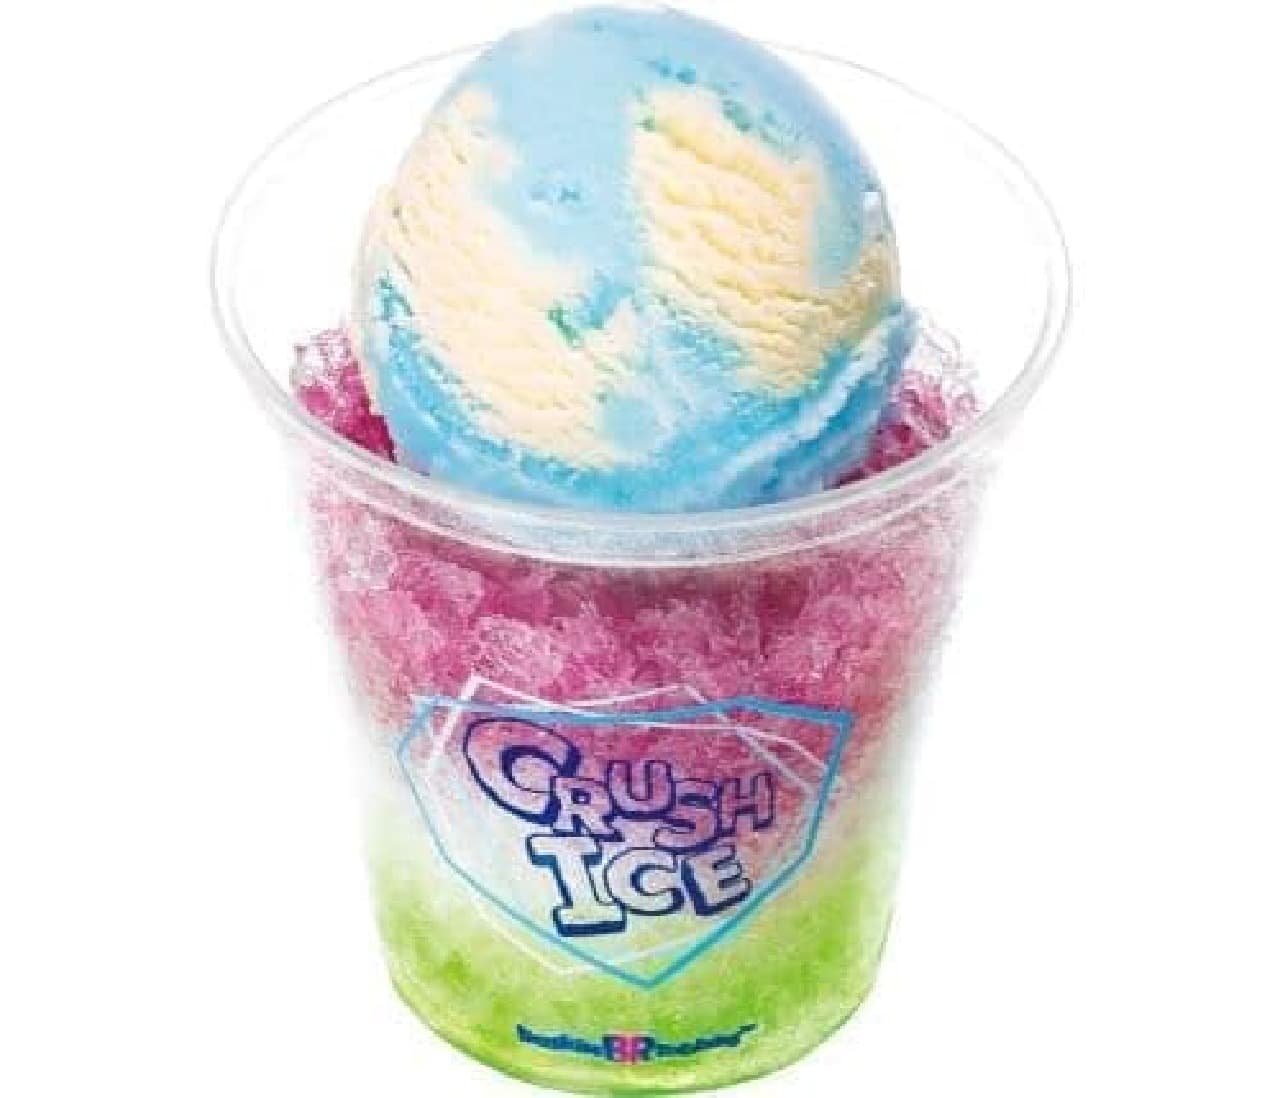 "Grape & Muscat" is a shaved ice that you can enjoy the two flavors of grape and muscat at the same time.